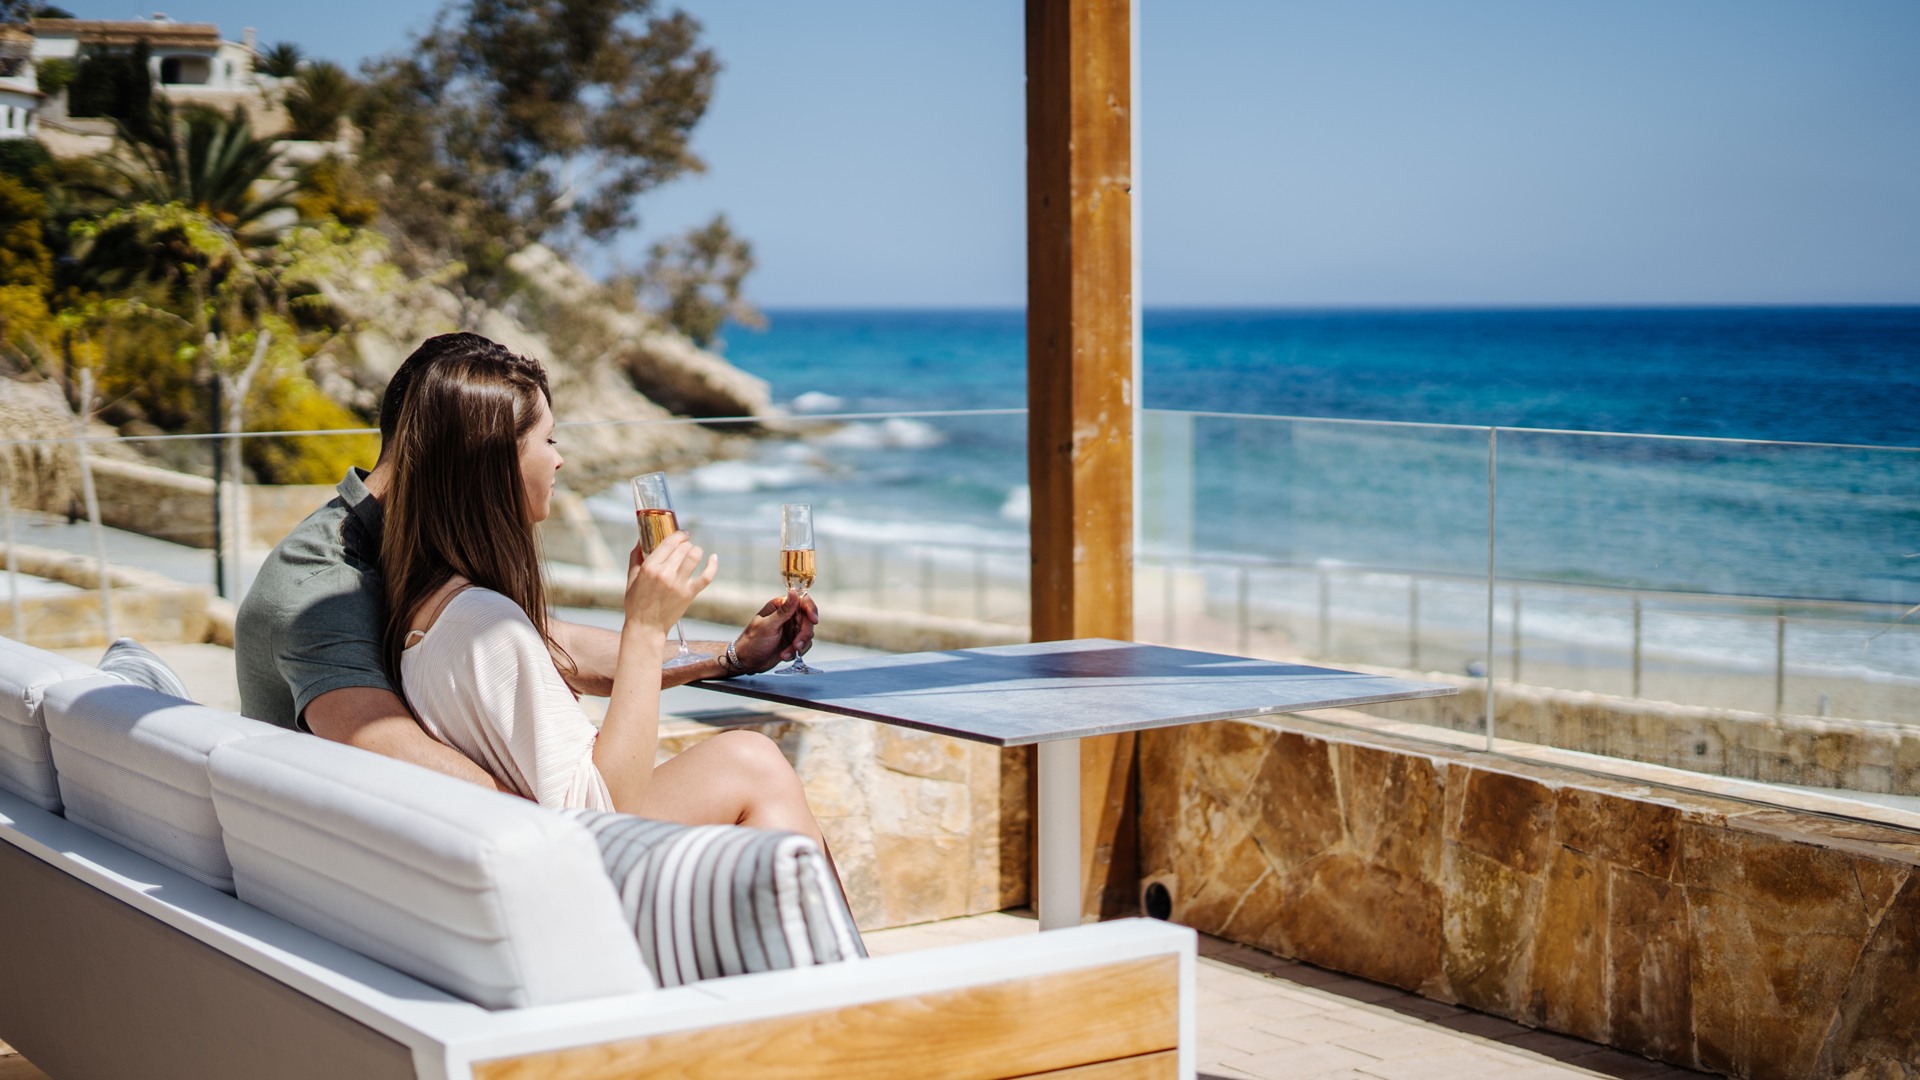 Tip: dine with panoramic views over the Mediterranean Sea